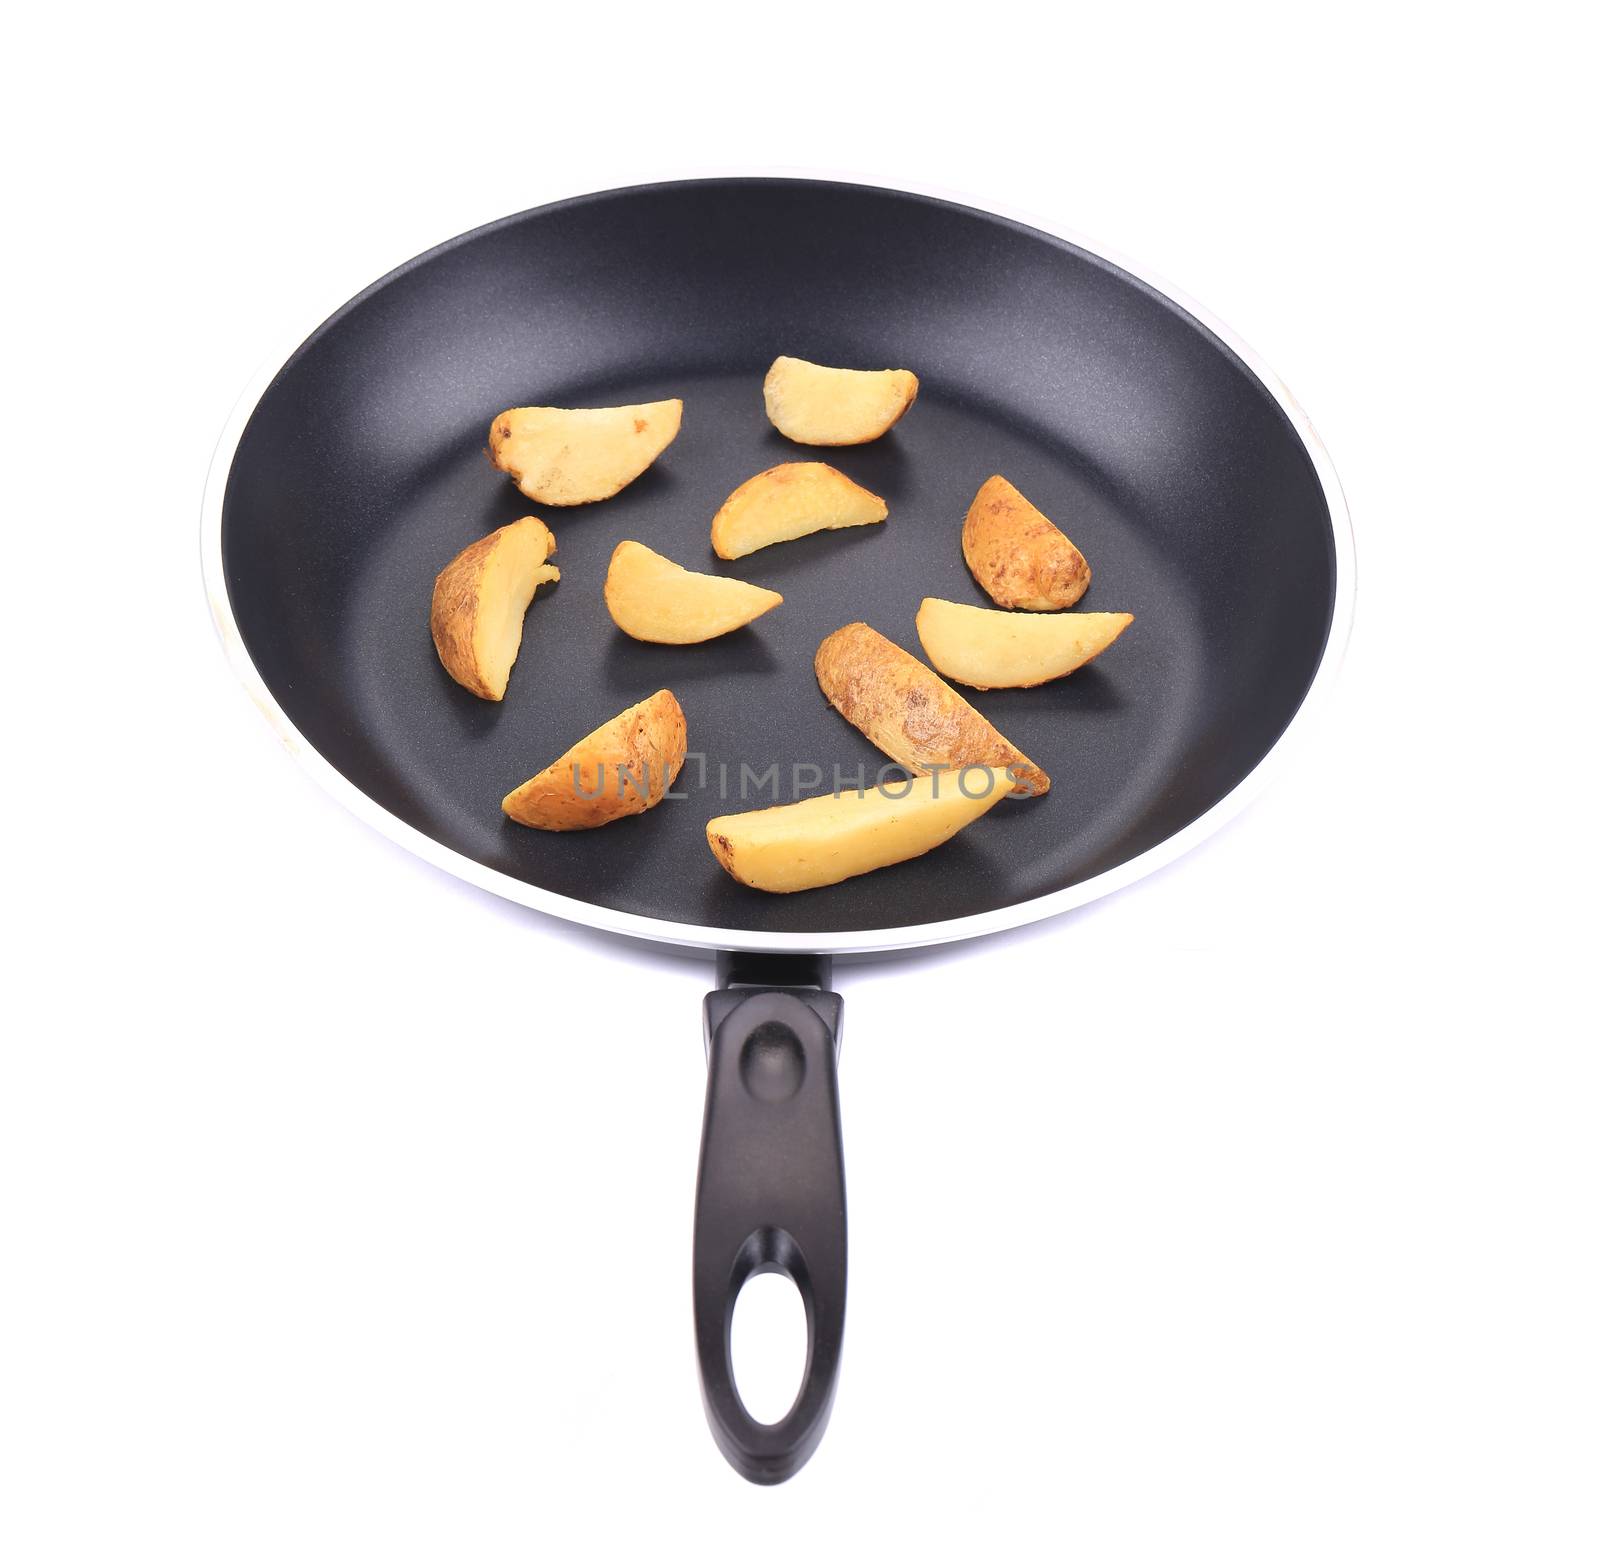 Fried potatoes on a black frying pan. On a white background.